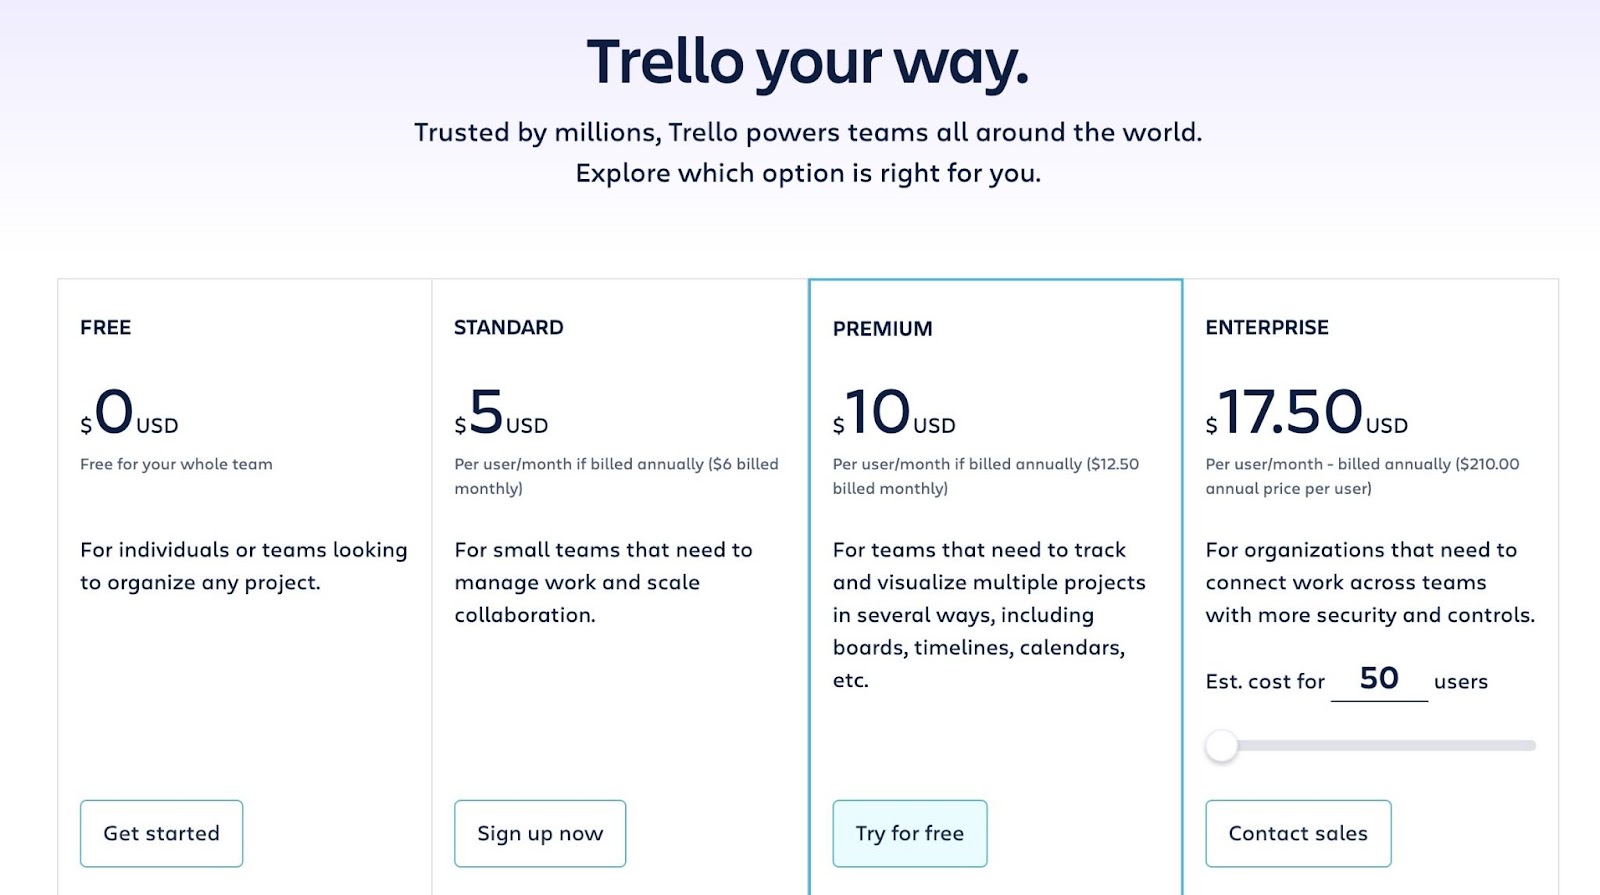 Trello's pricing page showing multiple options including a free plan along with free trials for its paid plans.